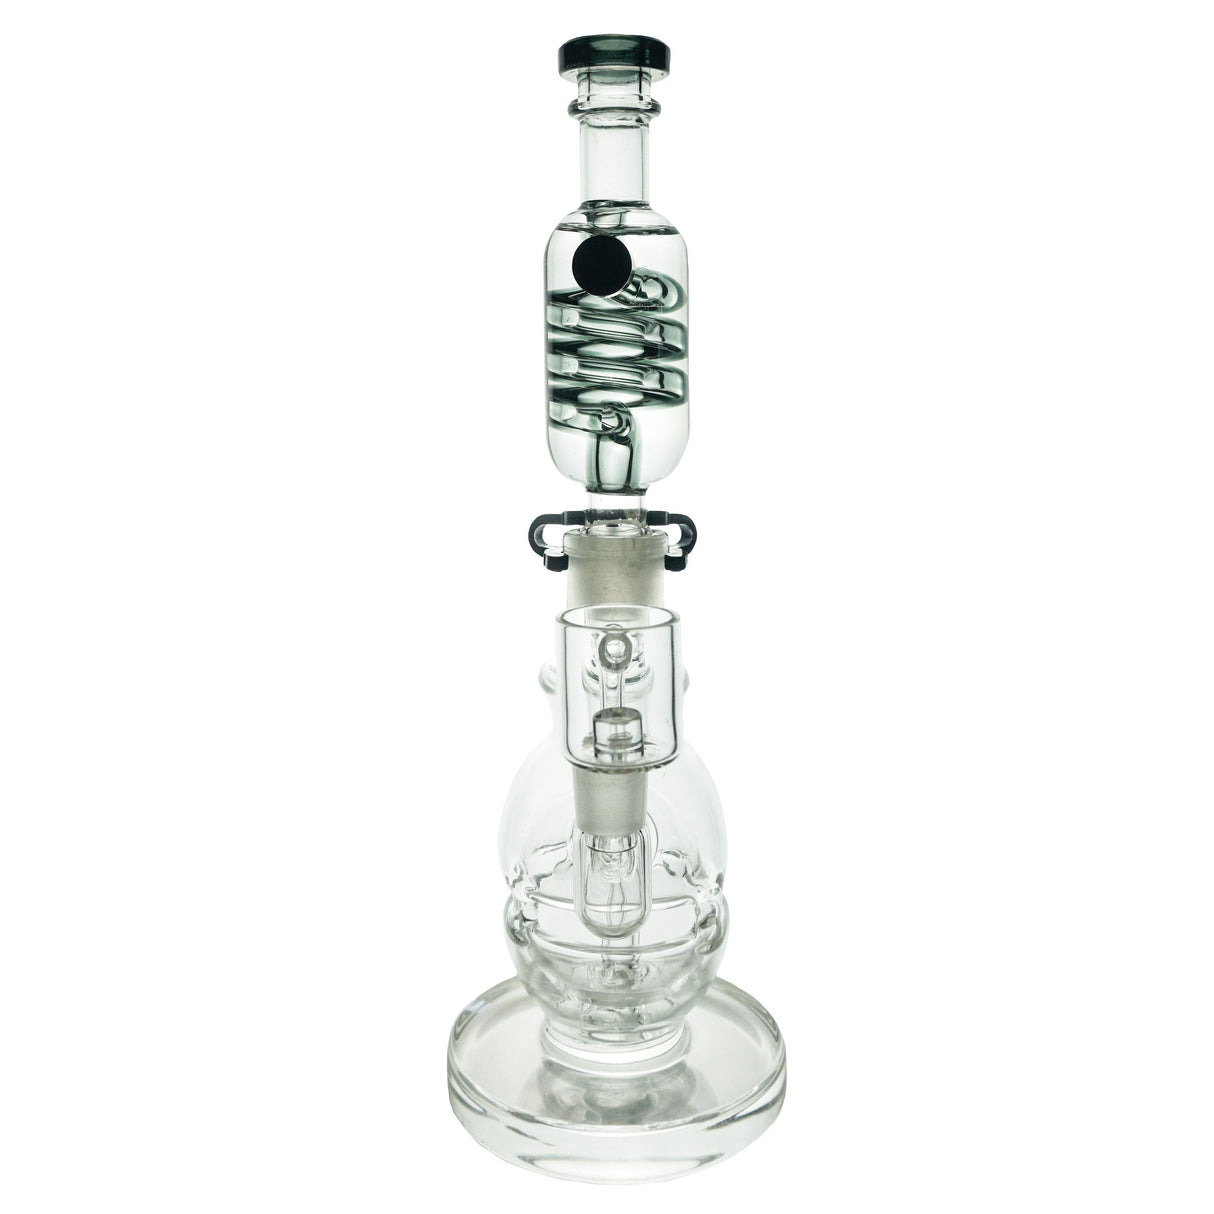 Freeze Pipe Mini Rig with Glycerin Coil and Glass Bowl - Front View